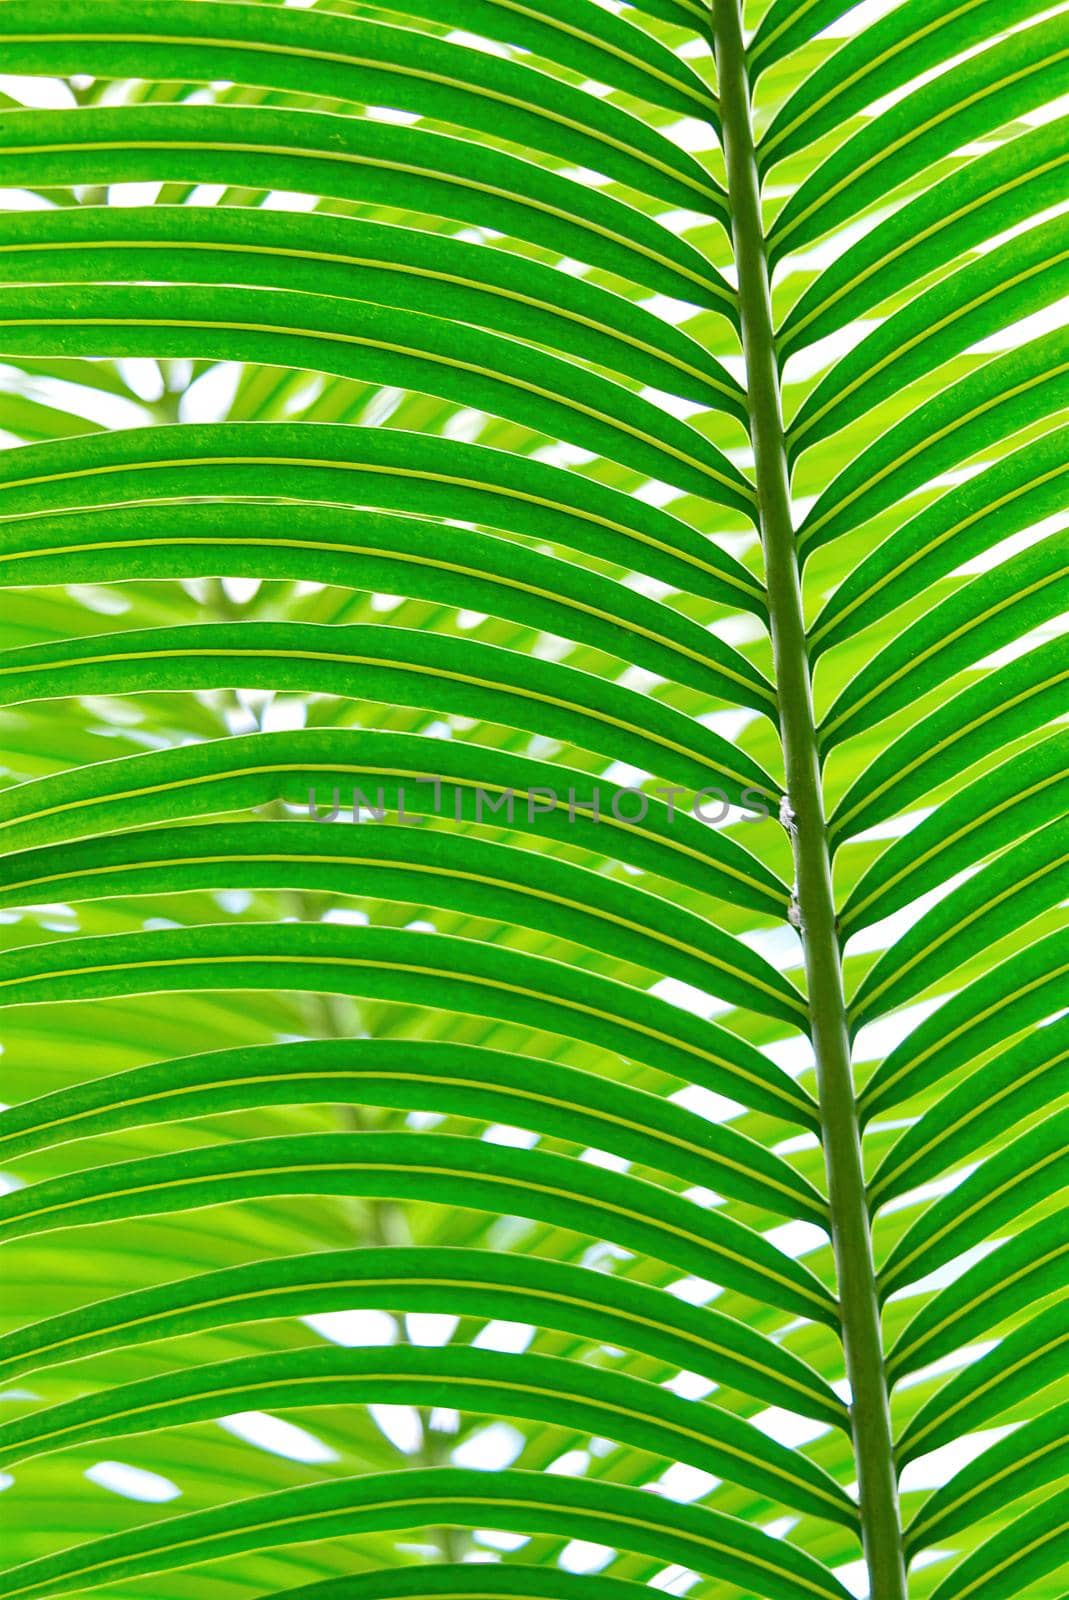 Striped of palm leaf, Abstract tropical green texture background, Vintage tone by PhotoTime